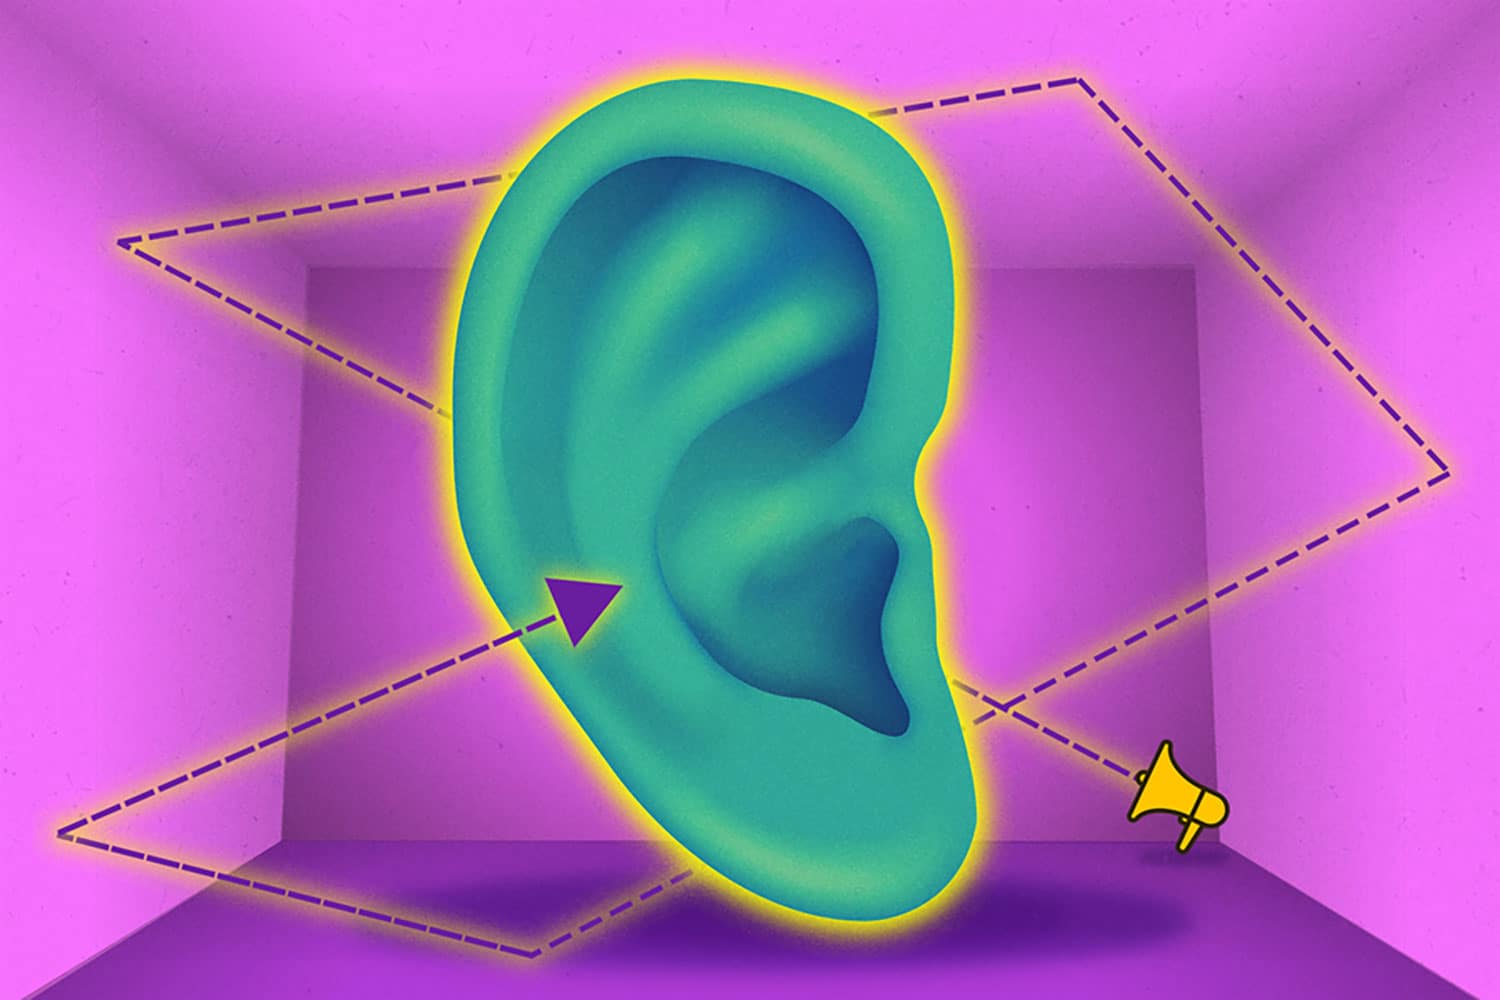 MIT neuroscientists developed a computer model that can localize sounds thumbnail